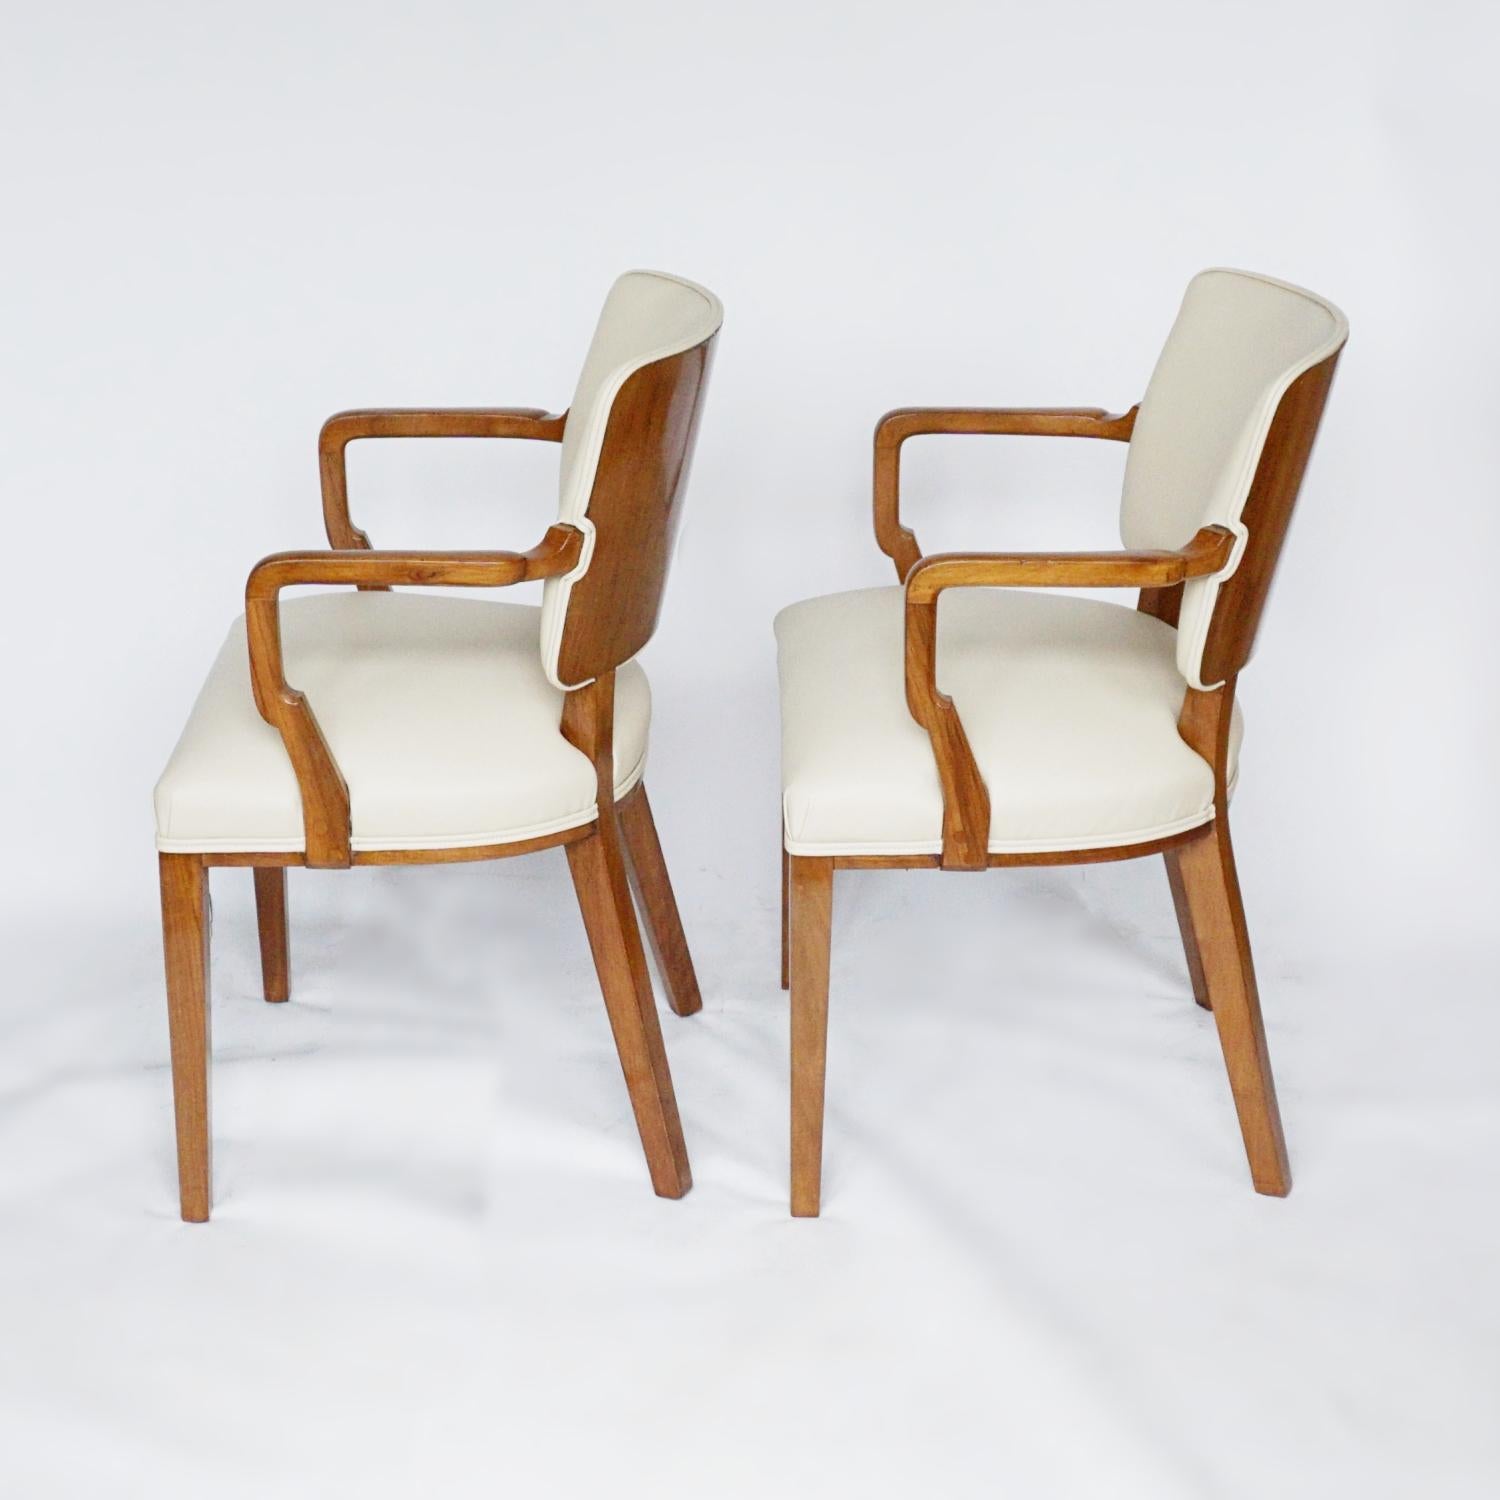 Pair of Art Deco Desk Chairs by Heal's of London Circa 1935 English 2